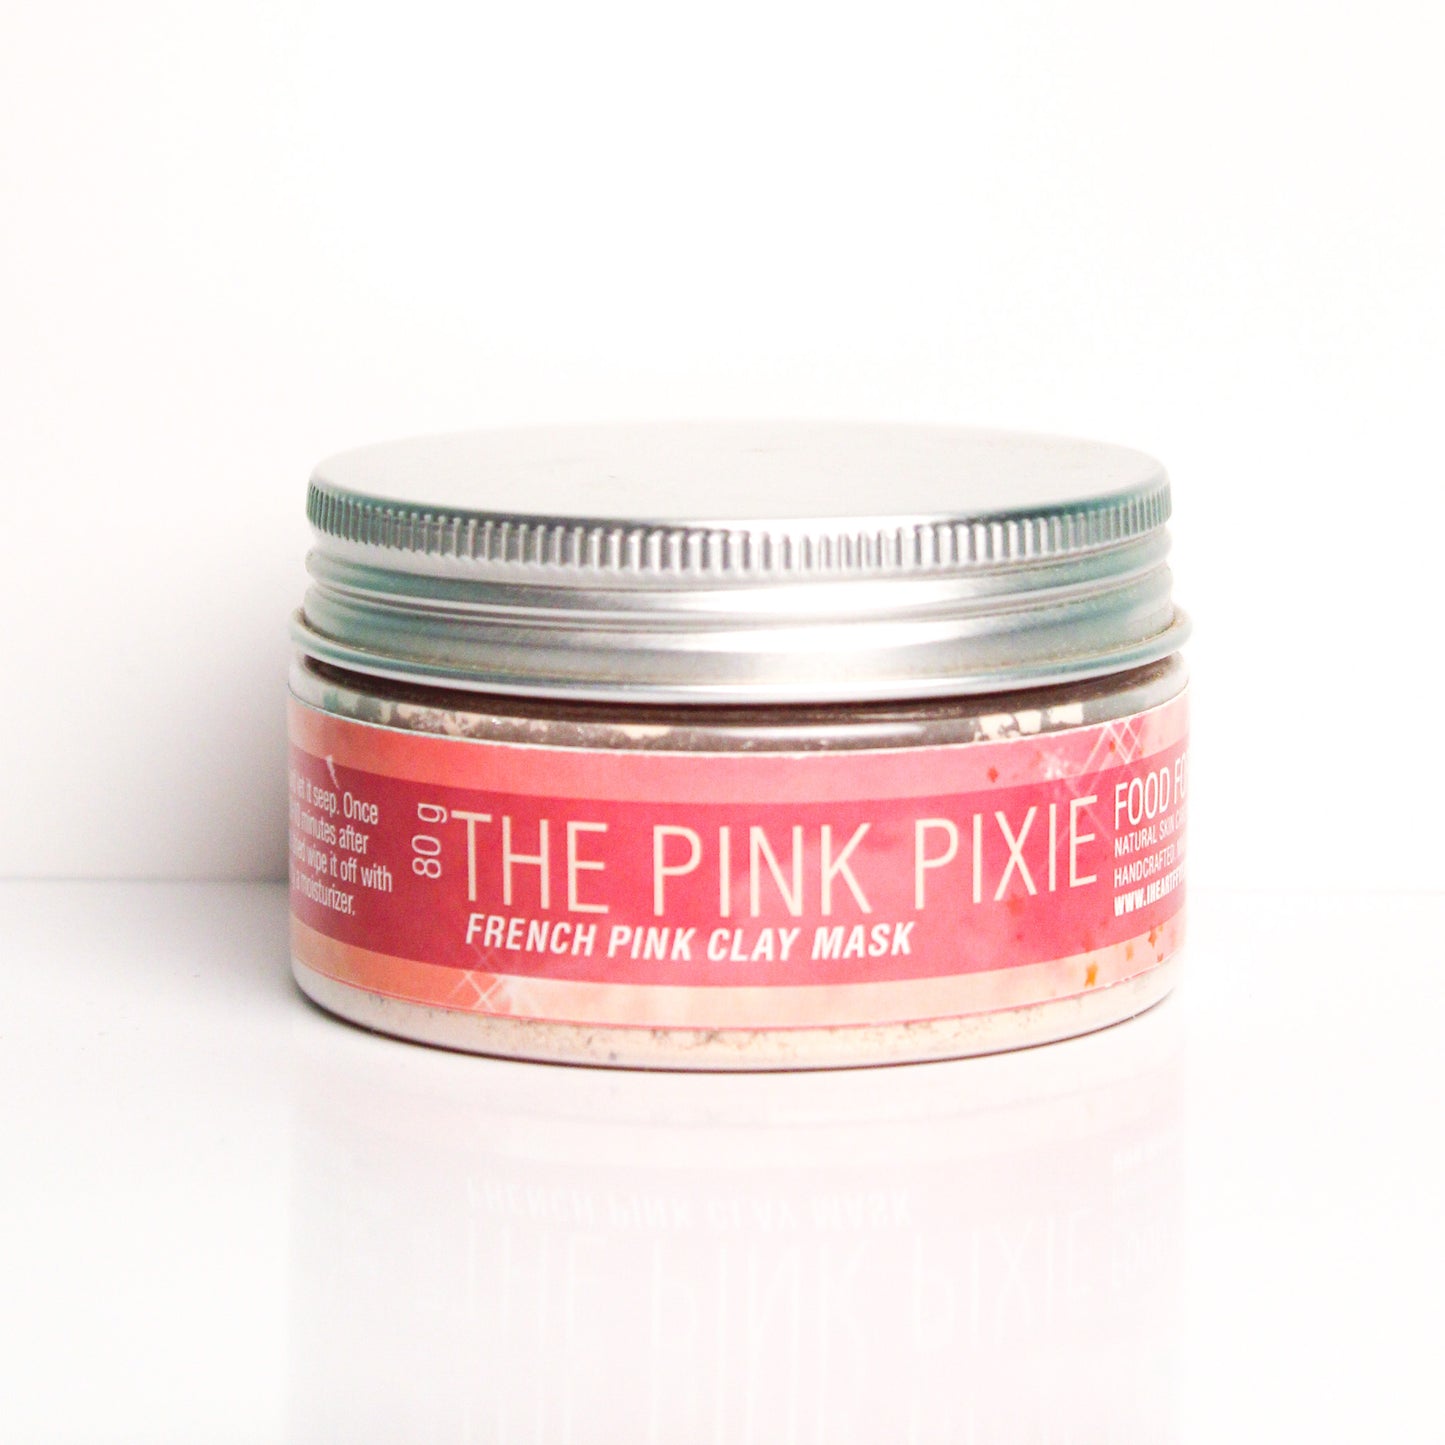 The Pink Pixie